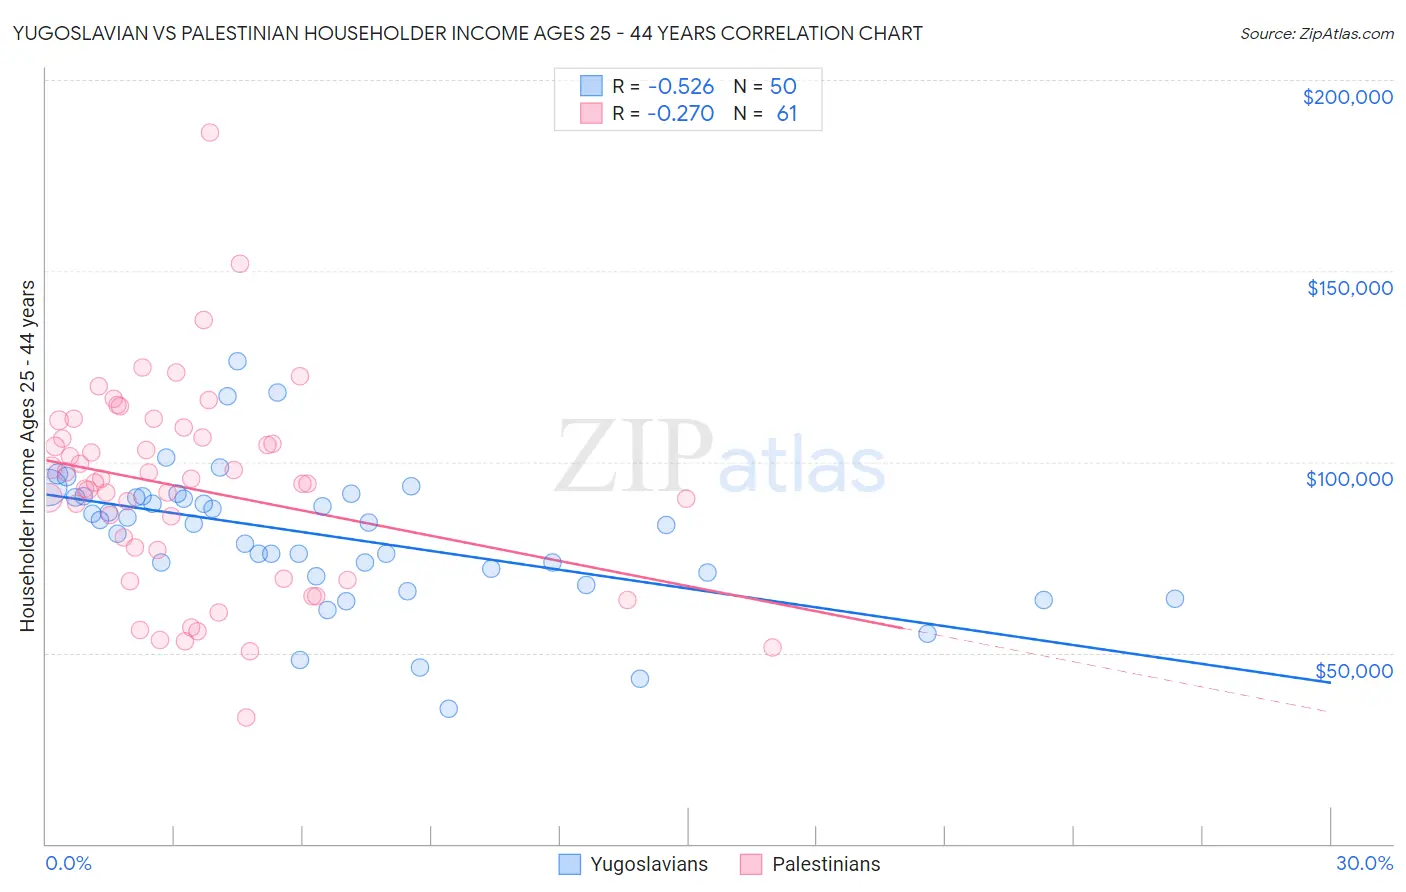 Yugoslavian vs Palestinian Householder Income Ages 25 - 44 years